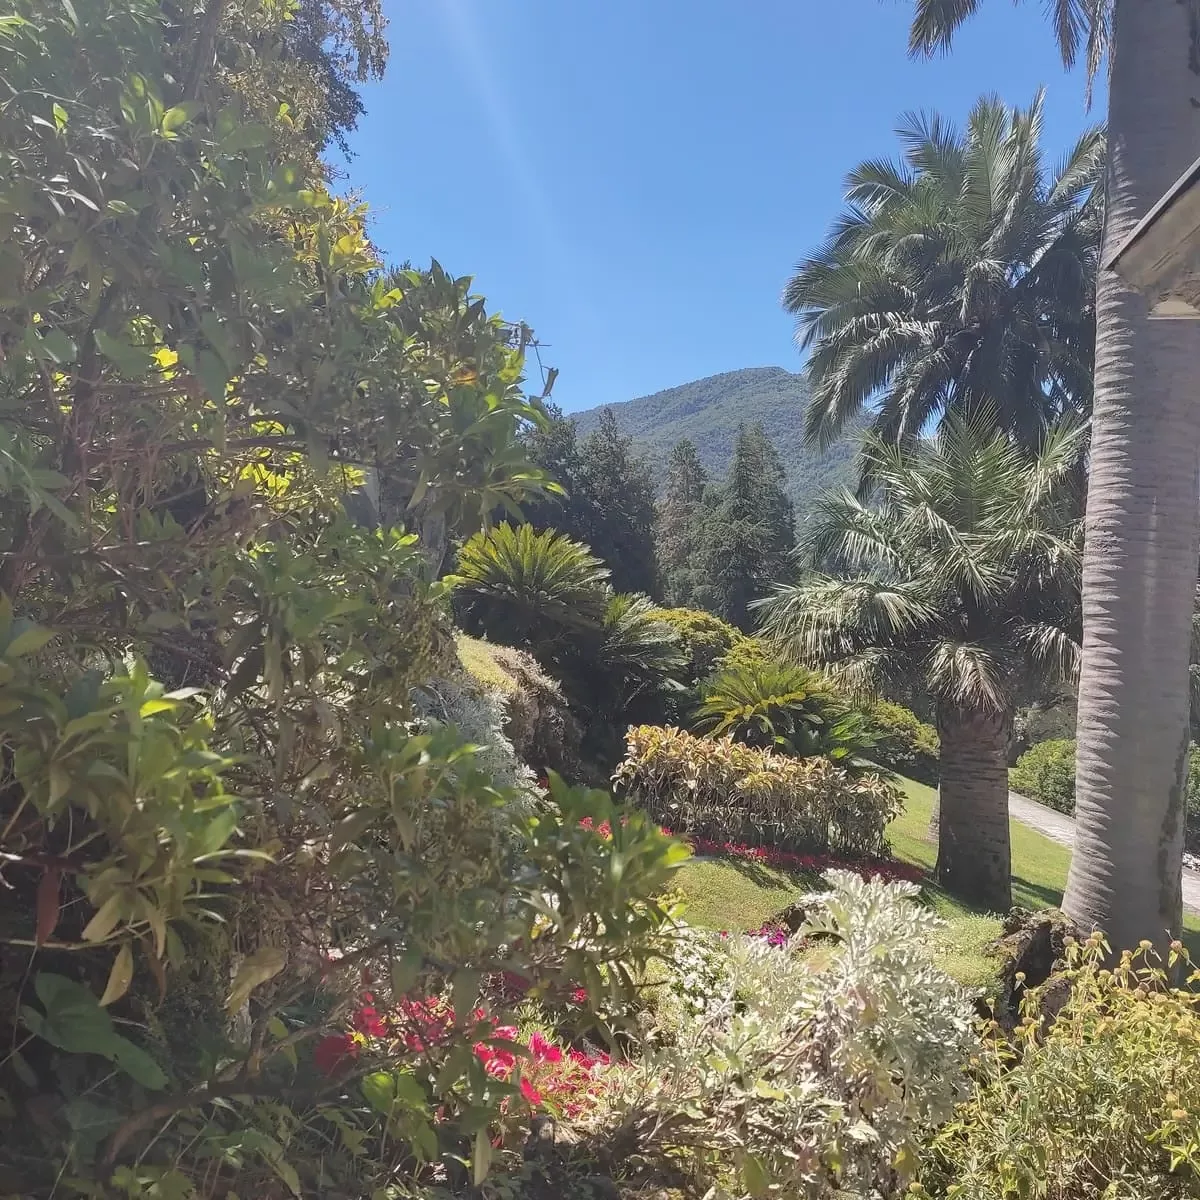 The gardens of Villa Melzi with sweeping lawns, shrubs, palm trees and pink blossoms are a highlight of a visit to Bellagio.